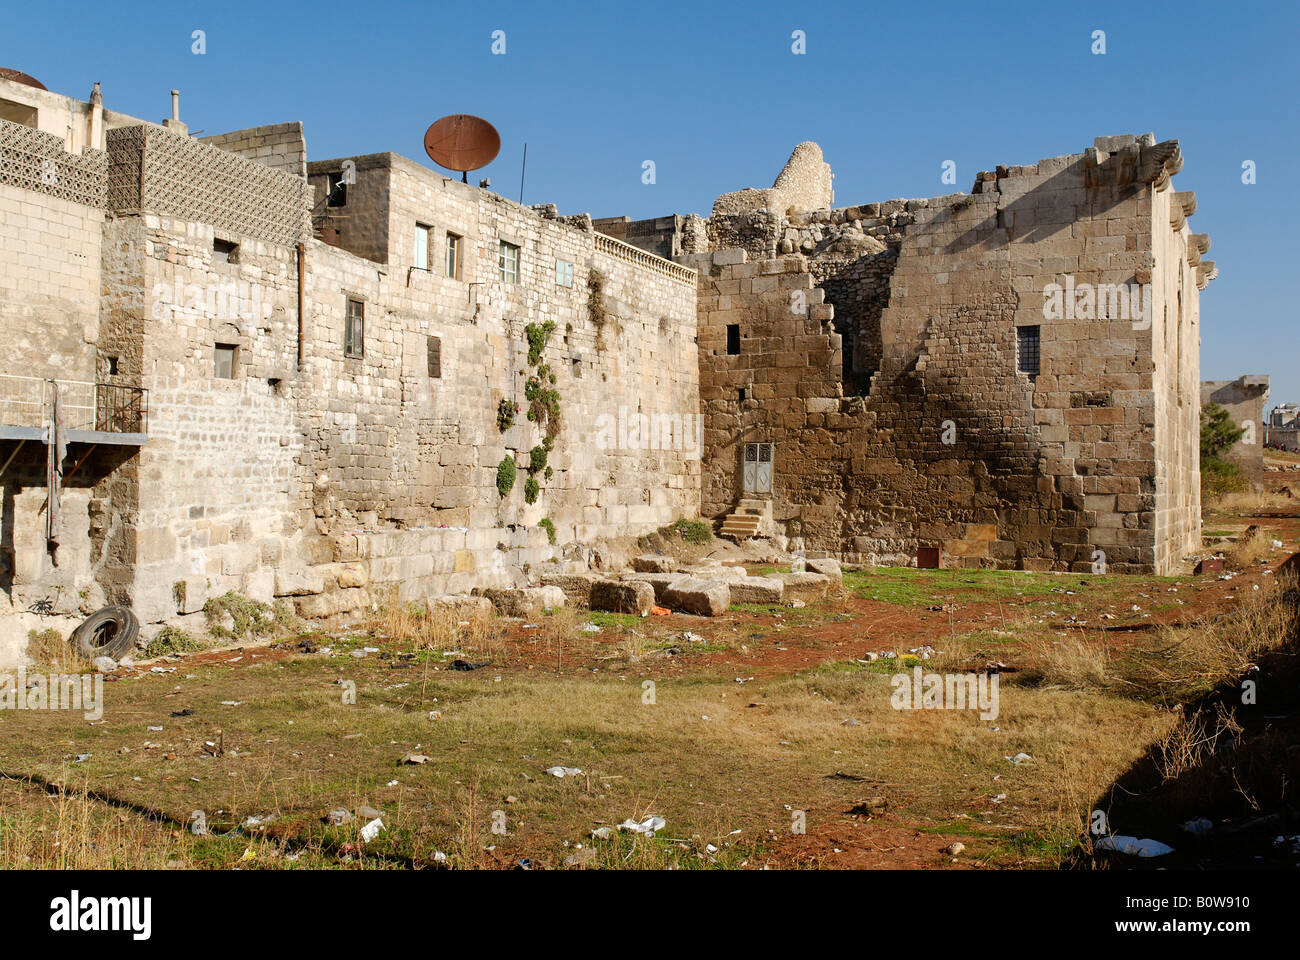 Historic city walls built around Aleppo, Syria, Middle East Stock Photo